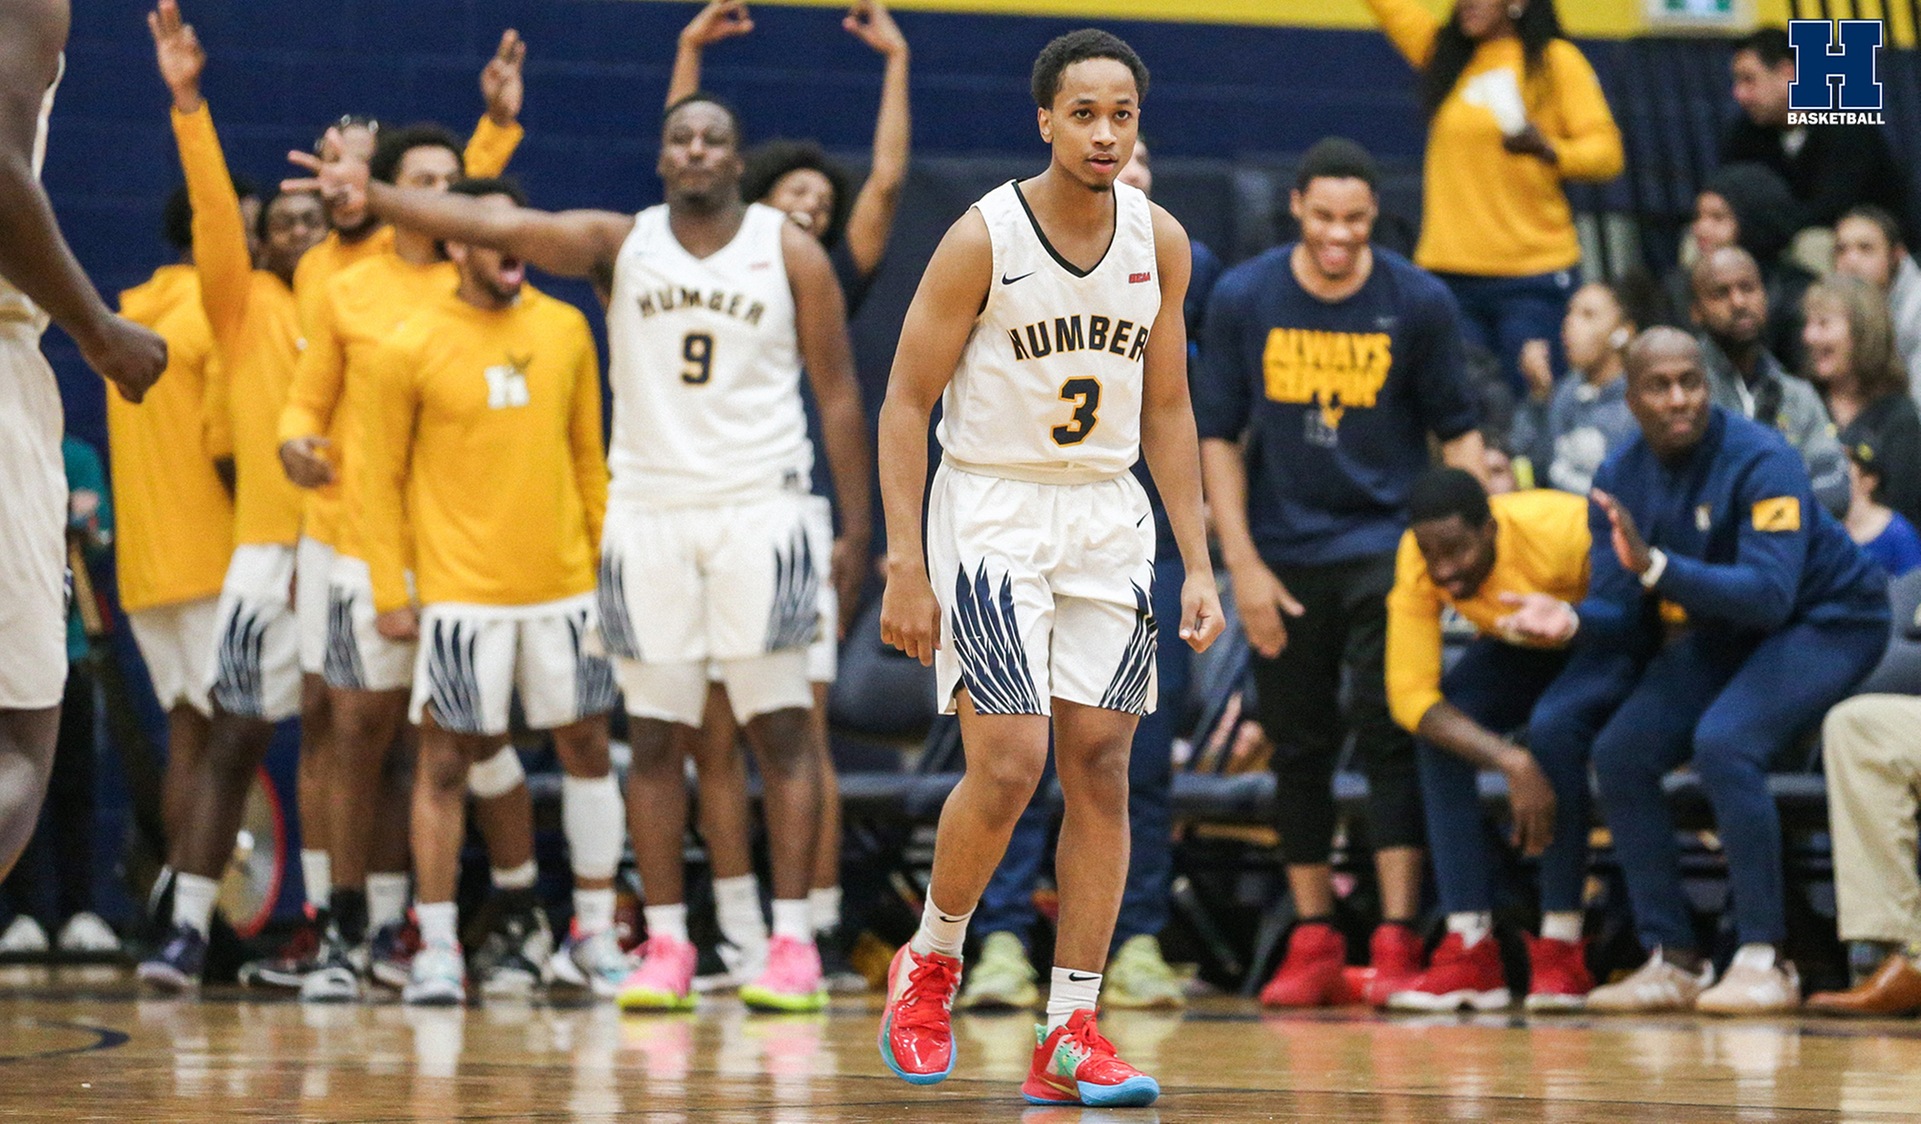 Mohamoud Sets Program Record for Career Three-Pointers in Win Over Canadore